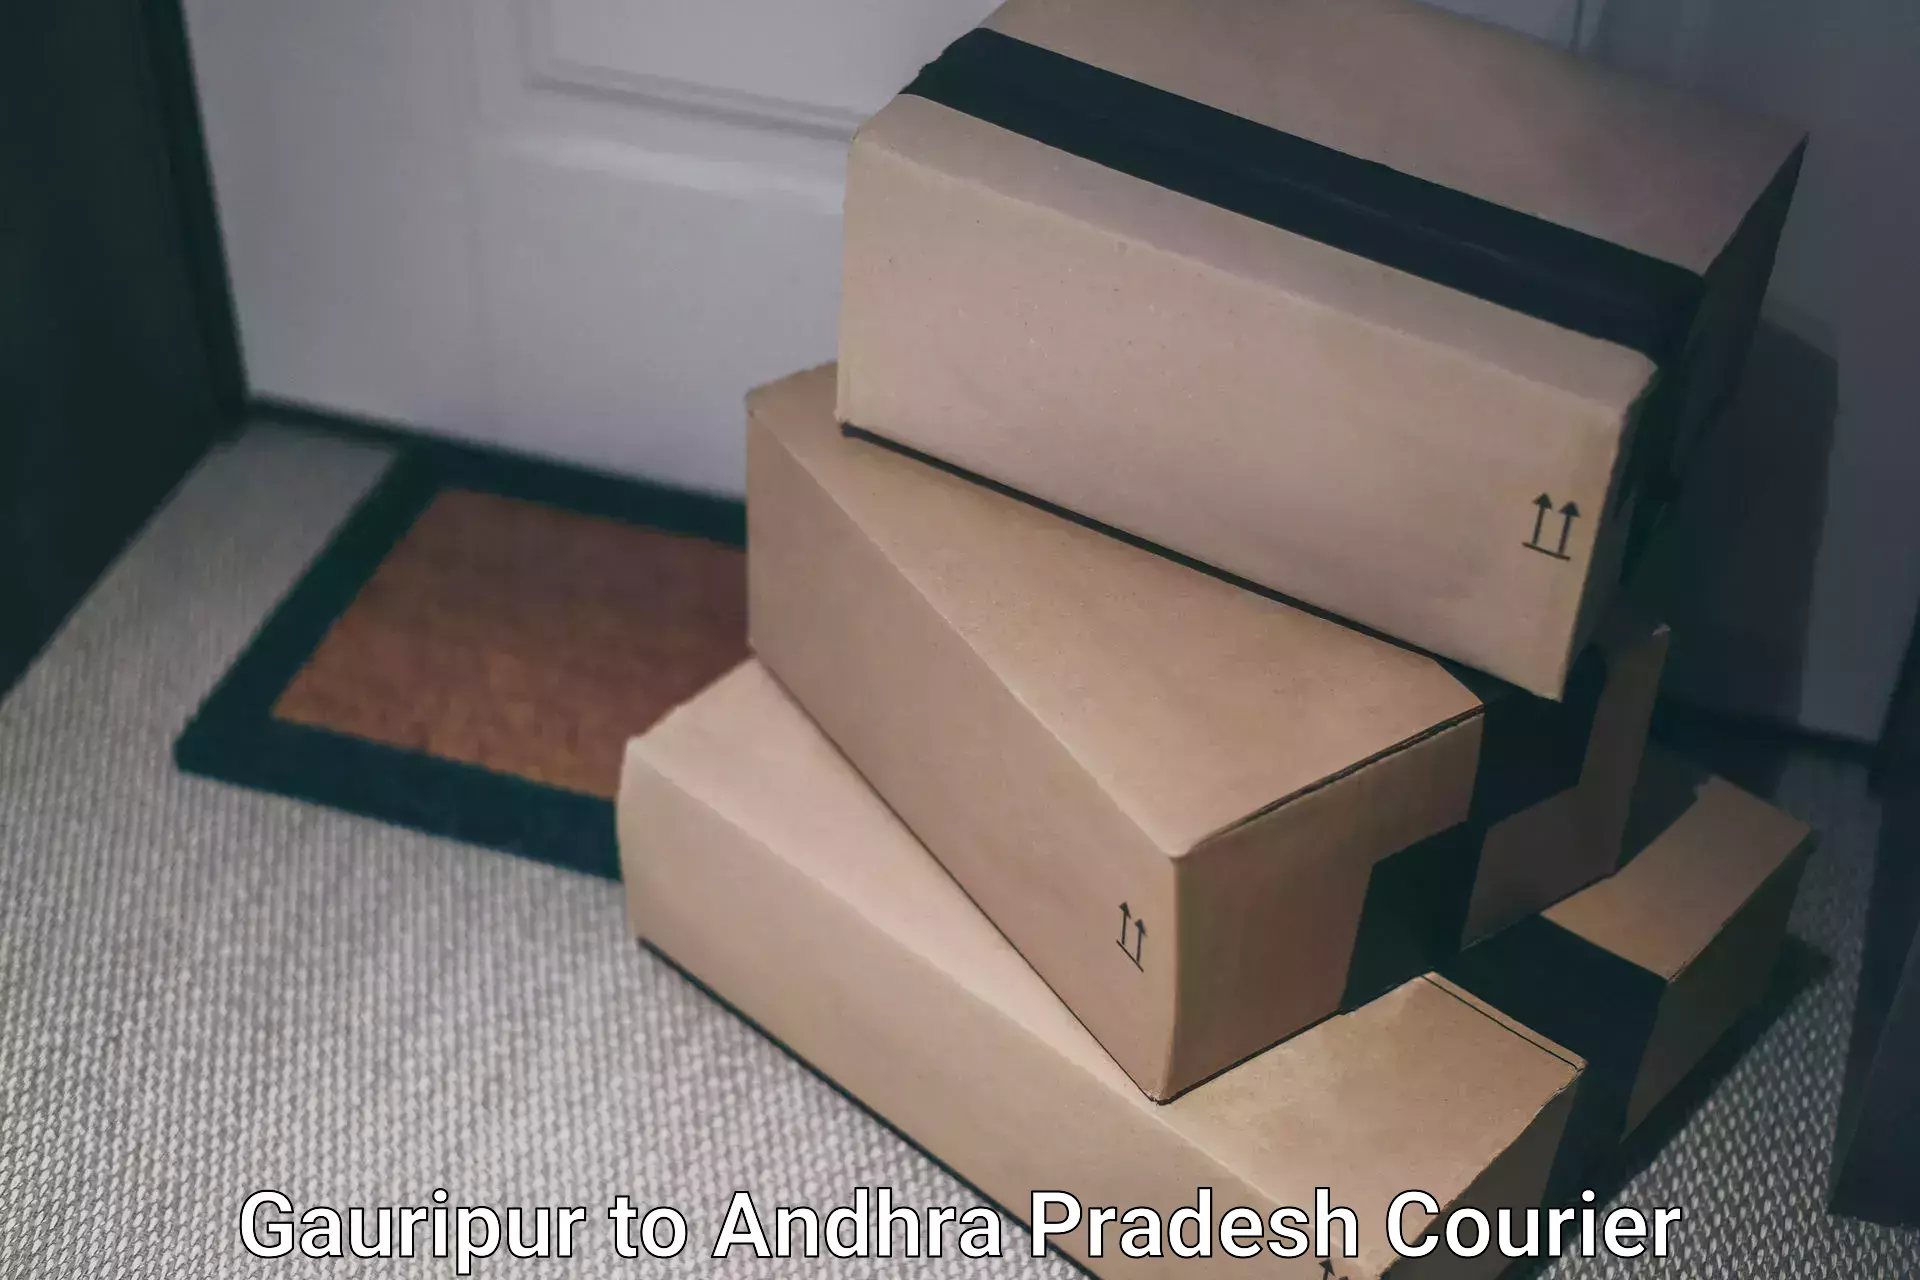 Next day courier Gauripur to Andhra Pradesh